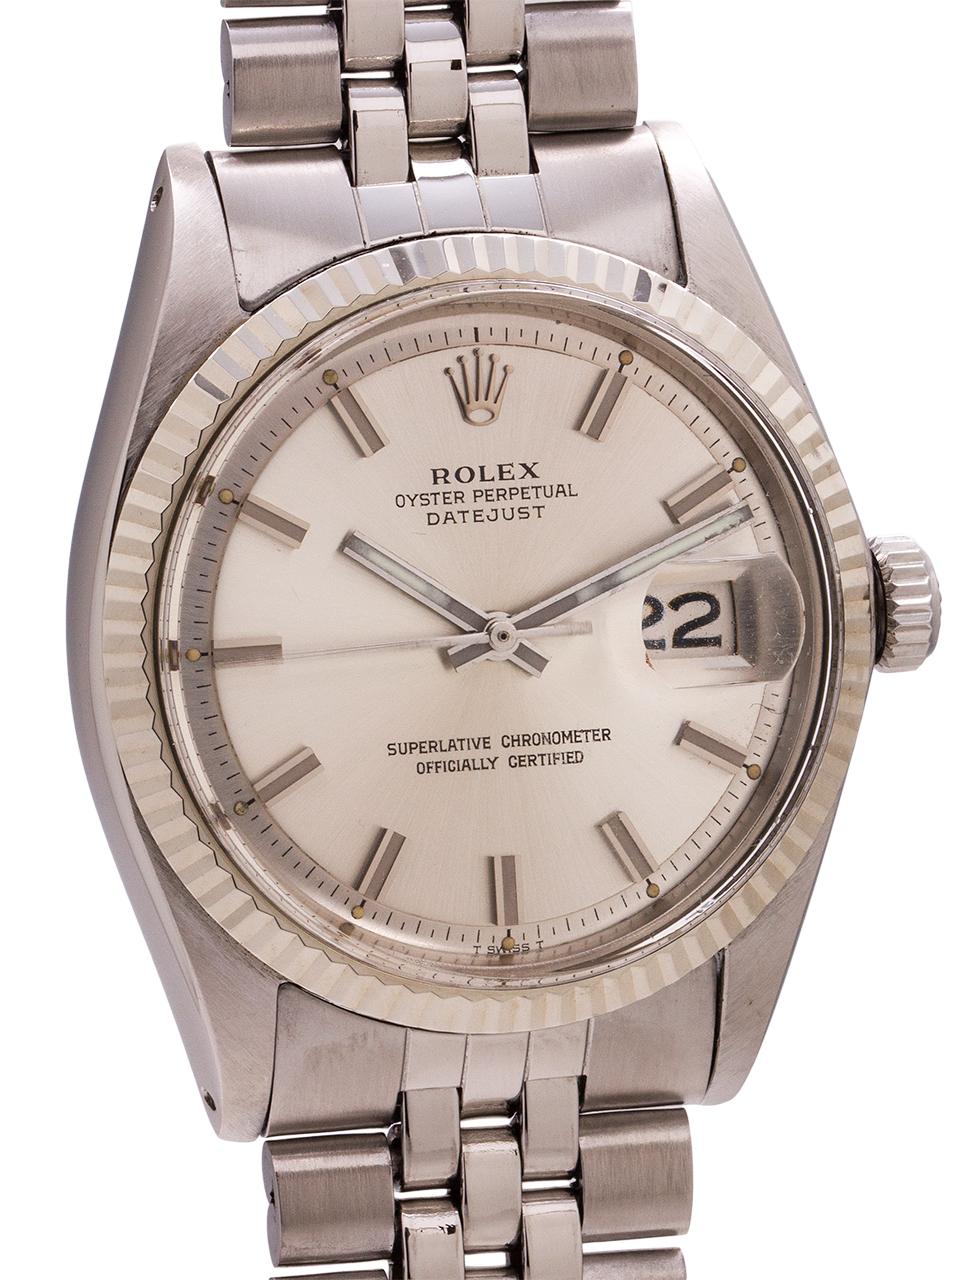 Rolex Stainless Steel Datejust “Fat Boy” ref # 1601 serial# 2.4 million circa 1969. 36mm diameter case with 14K white gold fluted bezel and acrylic crystal. Original silvered satin pie pan dial, given the “Fat Boy” nickname on account of the short